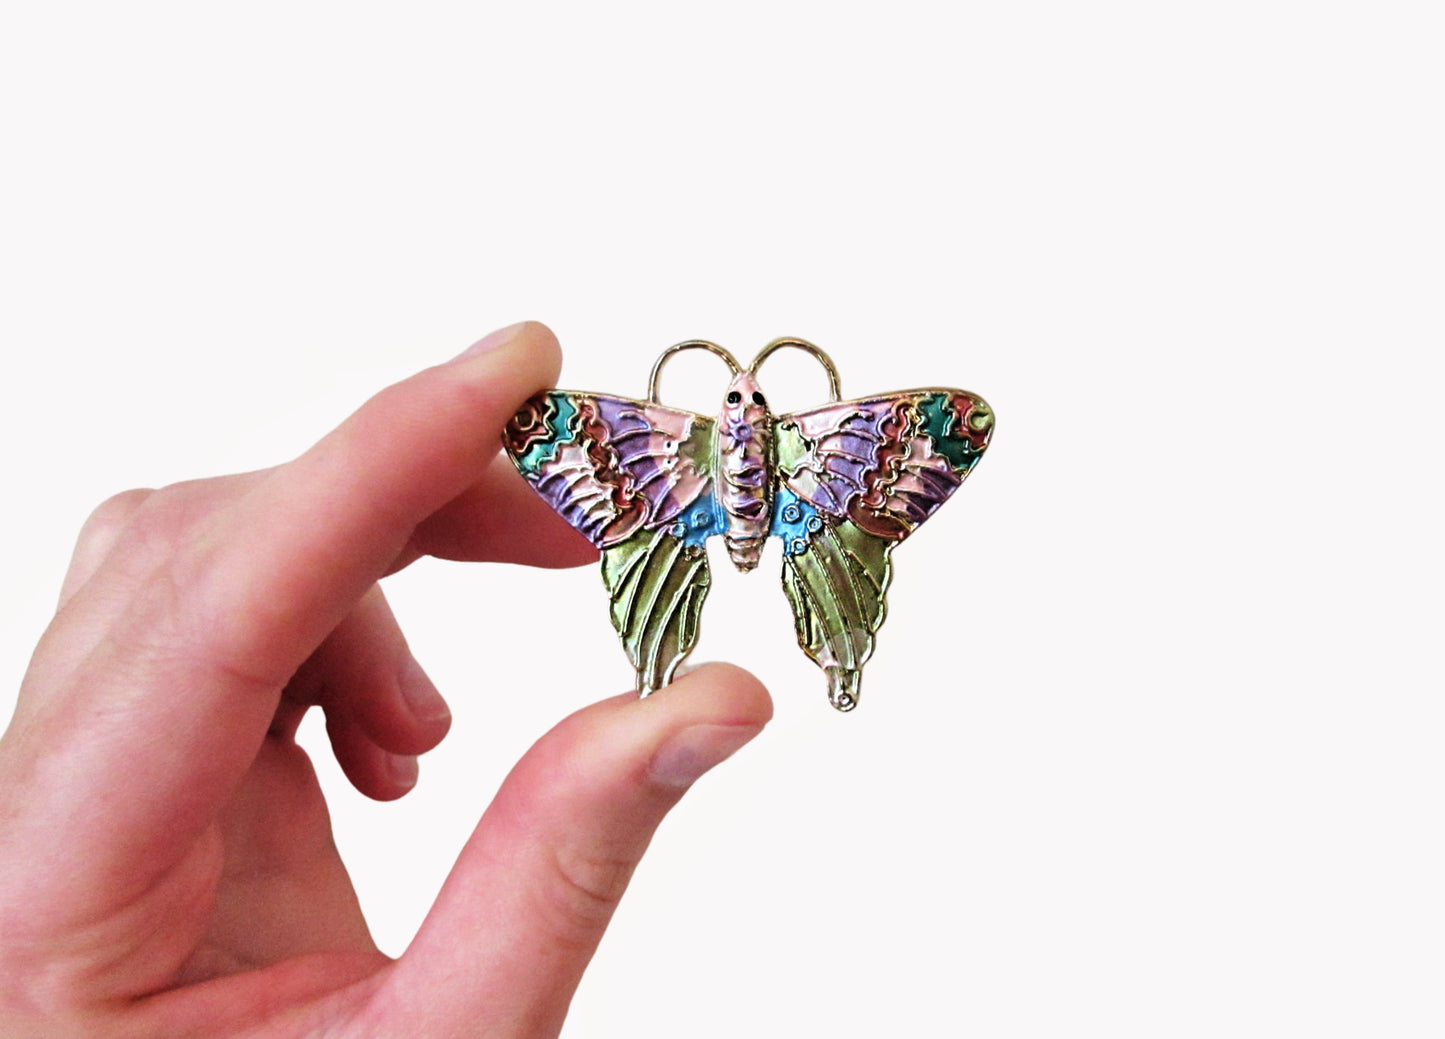 Vintage Butterfly Brooch, Colorful Enamel Butterfly Pin, Pink Purple Green Blue and Gold Tone Butterfly Accessory, VTG Rainbow Accessories